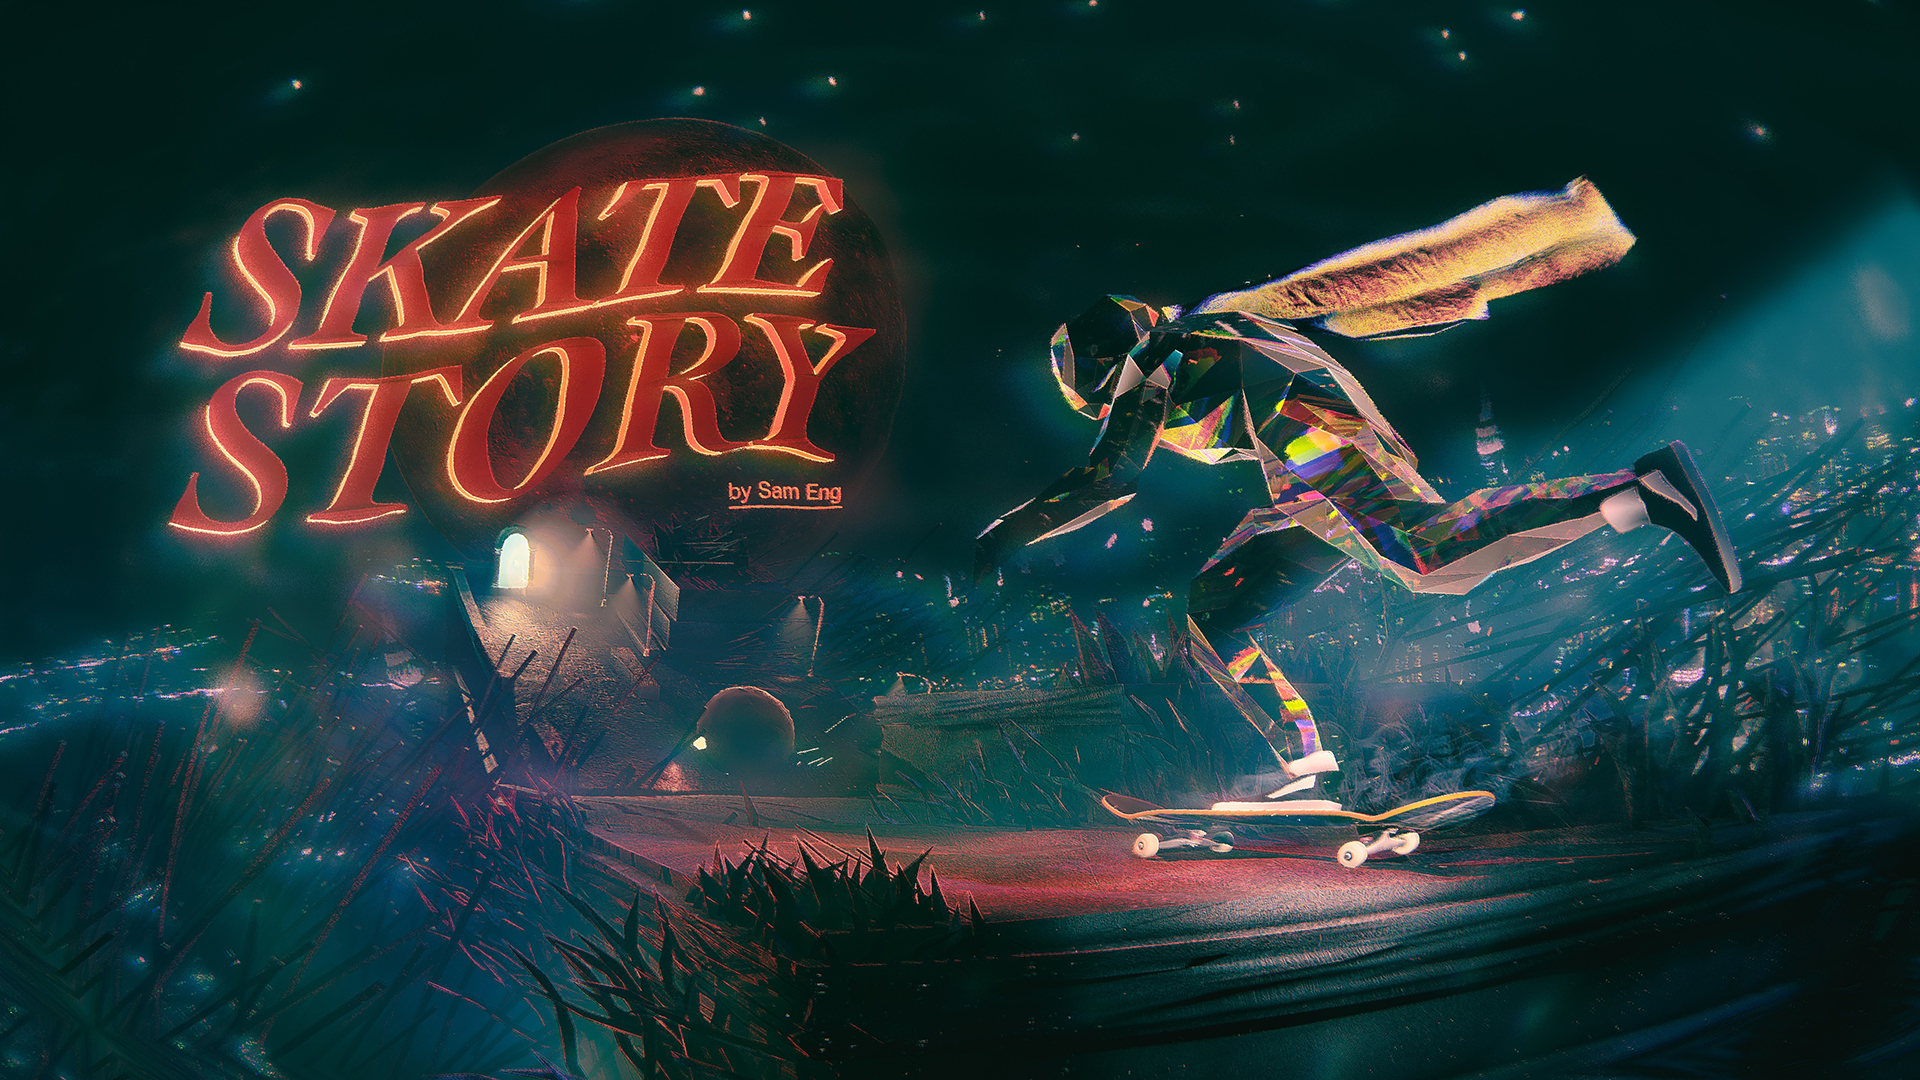 Skate Story puts a demon on a skateboard, and you NEED TO WATCH THE TRAILER